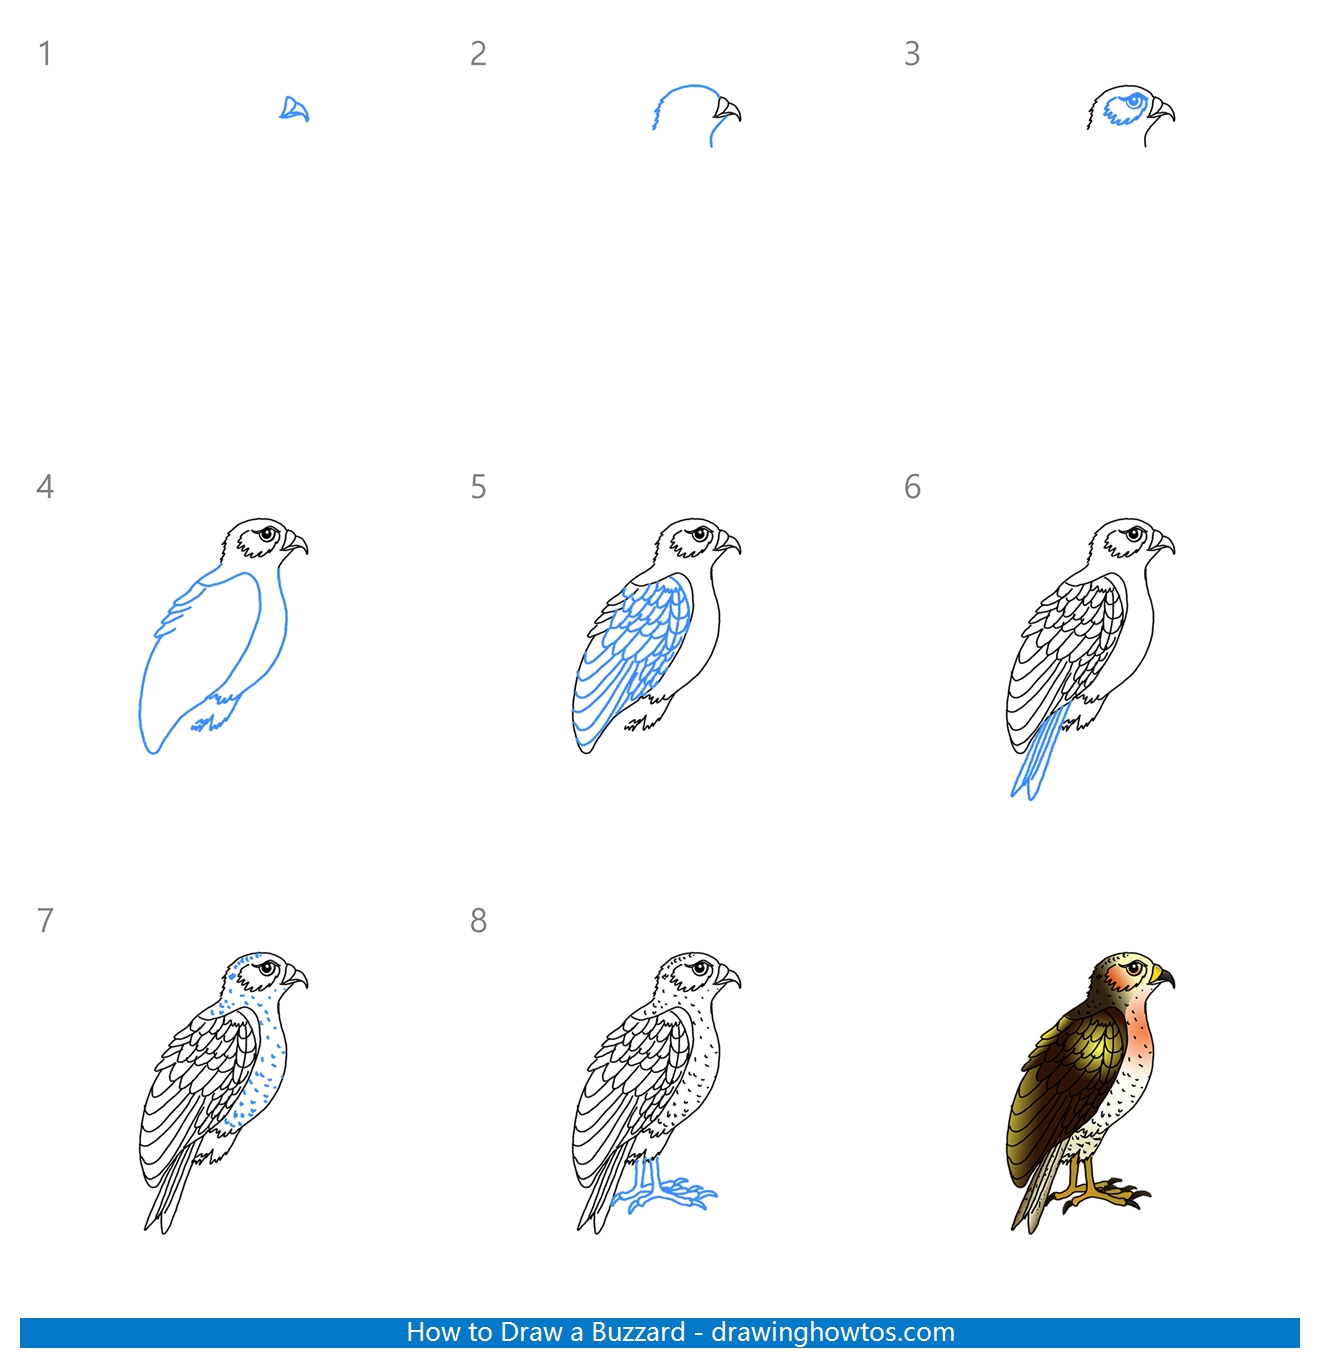 How to Draw a Buzzard Step by Step